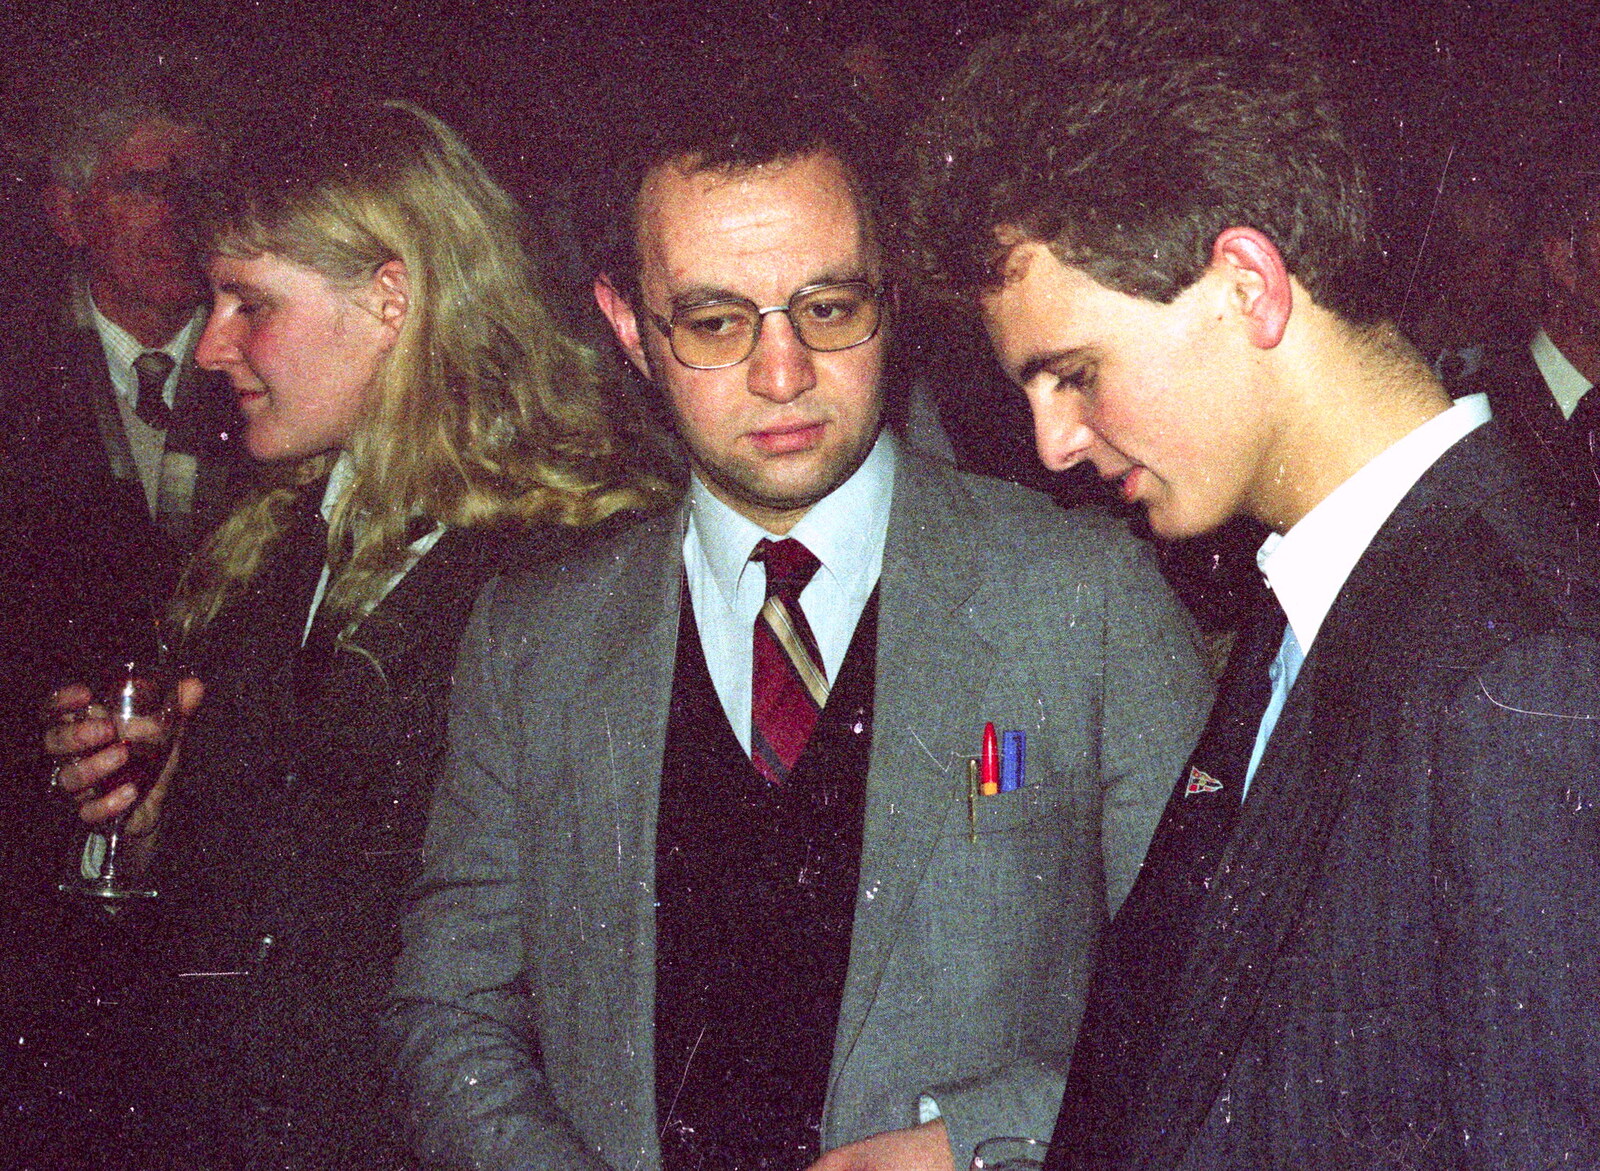 Mr. Smidman and Ray Mitchell chat from Brockenhurst College Presentation and Christmas, Hampshire - 19th December 1985